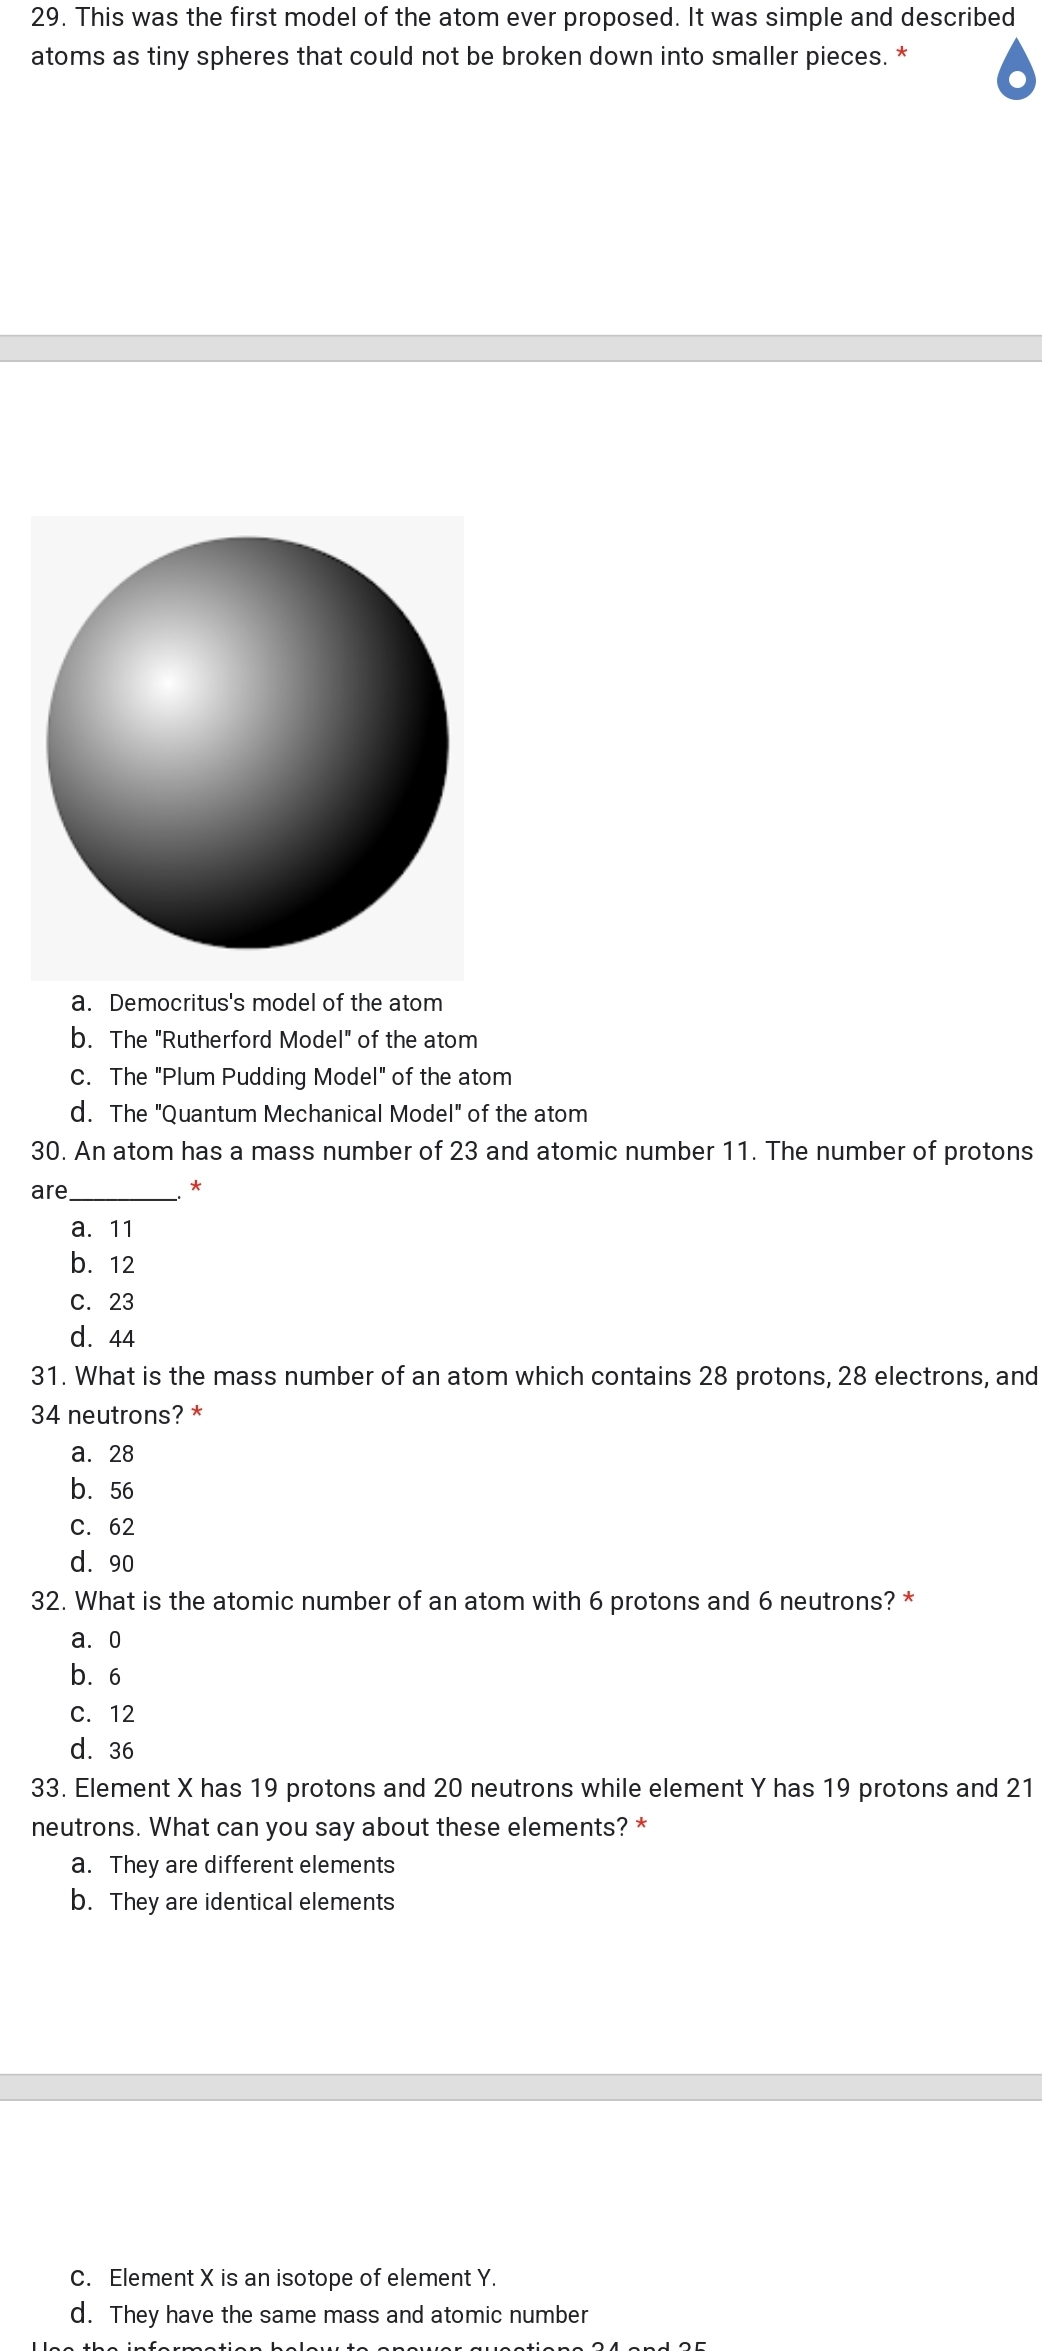 29. This was the first model of the atom ever proposed. It was simple and described
atoms as tiny spheres that could not be broken down into smaller pieces.
a. Democritus's model of the atom
b. The "Rutherford Model" of the atom
C. The "Plum Pudding Model" of the atom
d. The "Quantum Mechanical Model" of the atom
30. An atom has a mass number of 23 and atomic number 11. The number of protons
are,
а. 11
b. 12
С. 23
d. 44
31. What is the mass number of an atom which contains 28 protons, 28 electrons, and
34 neutrons? *
а. 28
b. 56
С. 62
d. 90
32. What is the atomic number of an atom with 6 protons and 6 neutrons? *
а. О
b. 6
C. 12
d. 36
33. Element X has 19 protons and 20 neutrons while element Y has 19 protons and 21
neutrons. What can you say about these elements? *
a. They are different elements
b. They are identical elements
C. Element X is an isotope of element Y.
d. They have the same mass and atomic number
Lloo th
formation helow to
queotiono 34 ond 35
